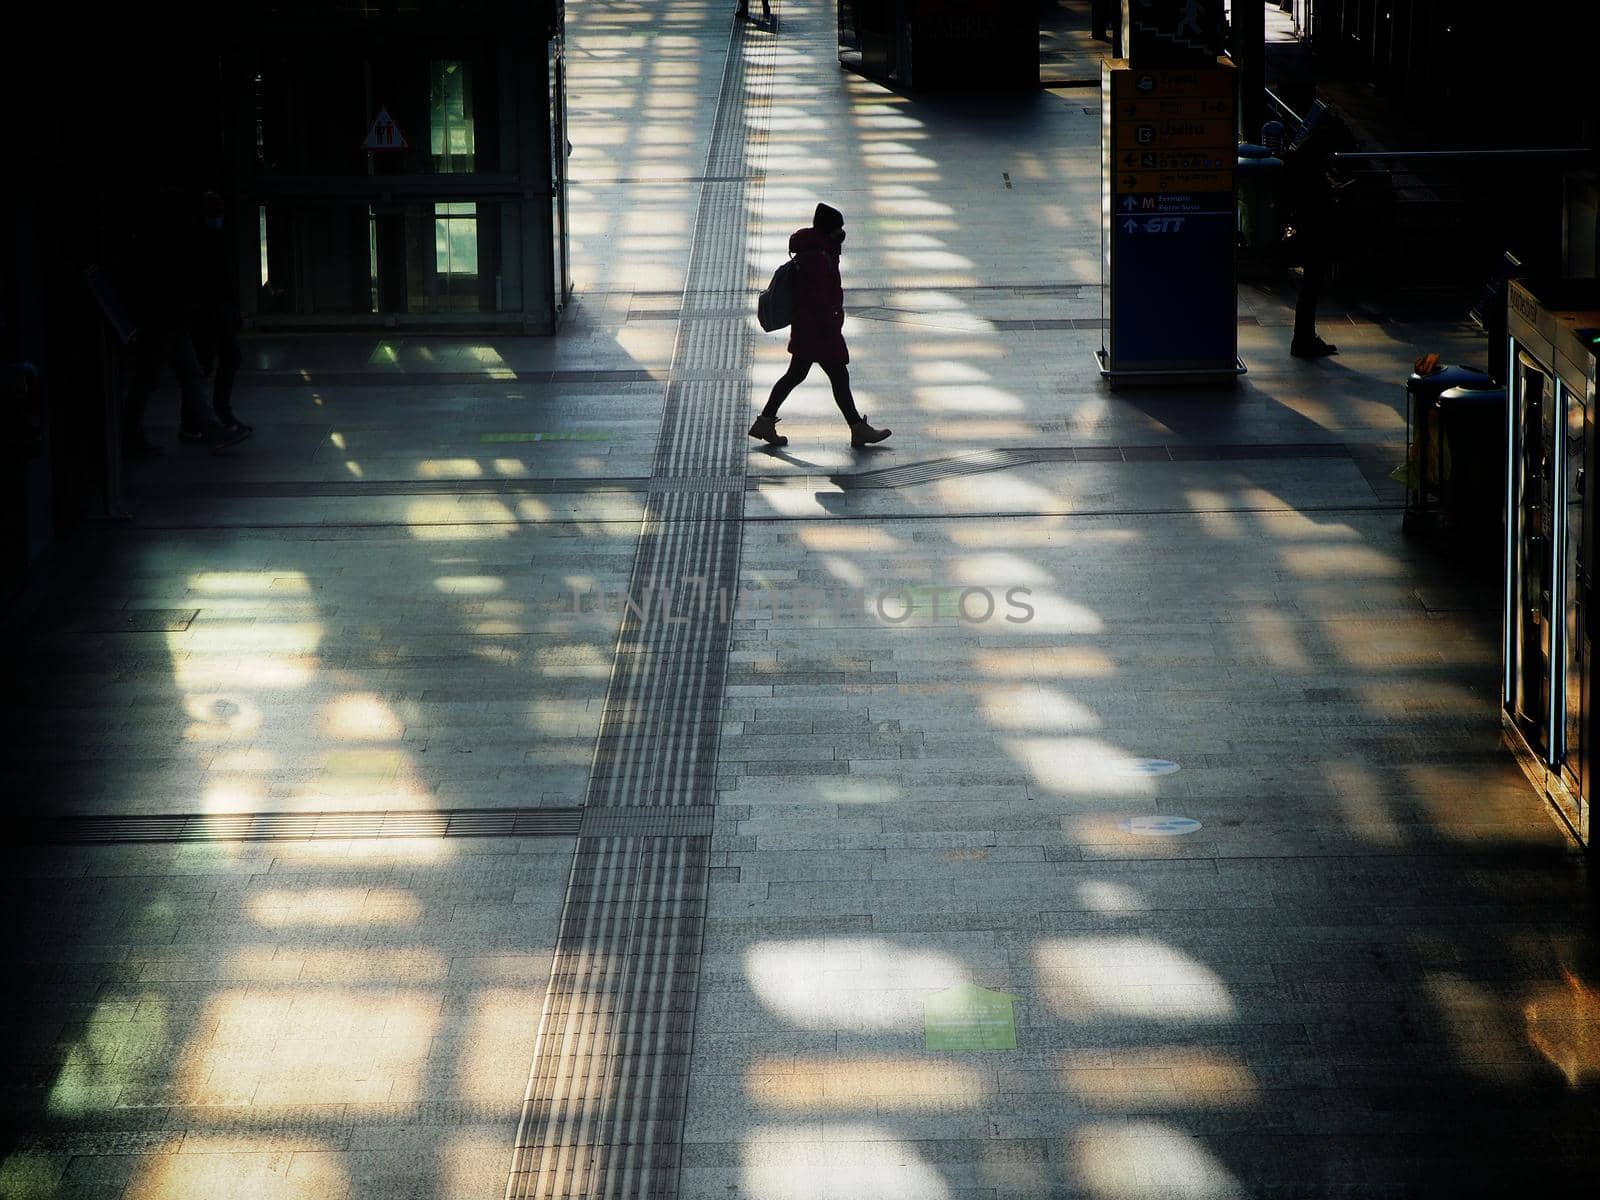 Woman silhouette walking wearing protective mask in train station Turin Italy January 13 2021 deliberated motion blur by lemar